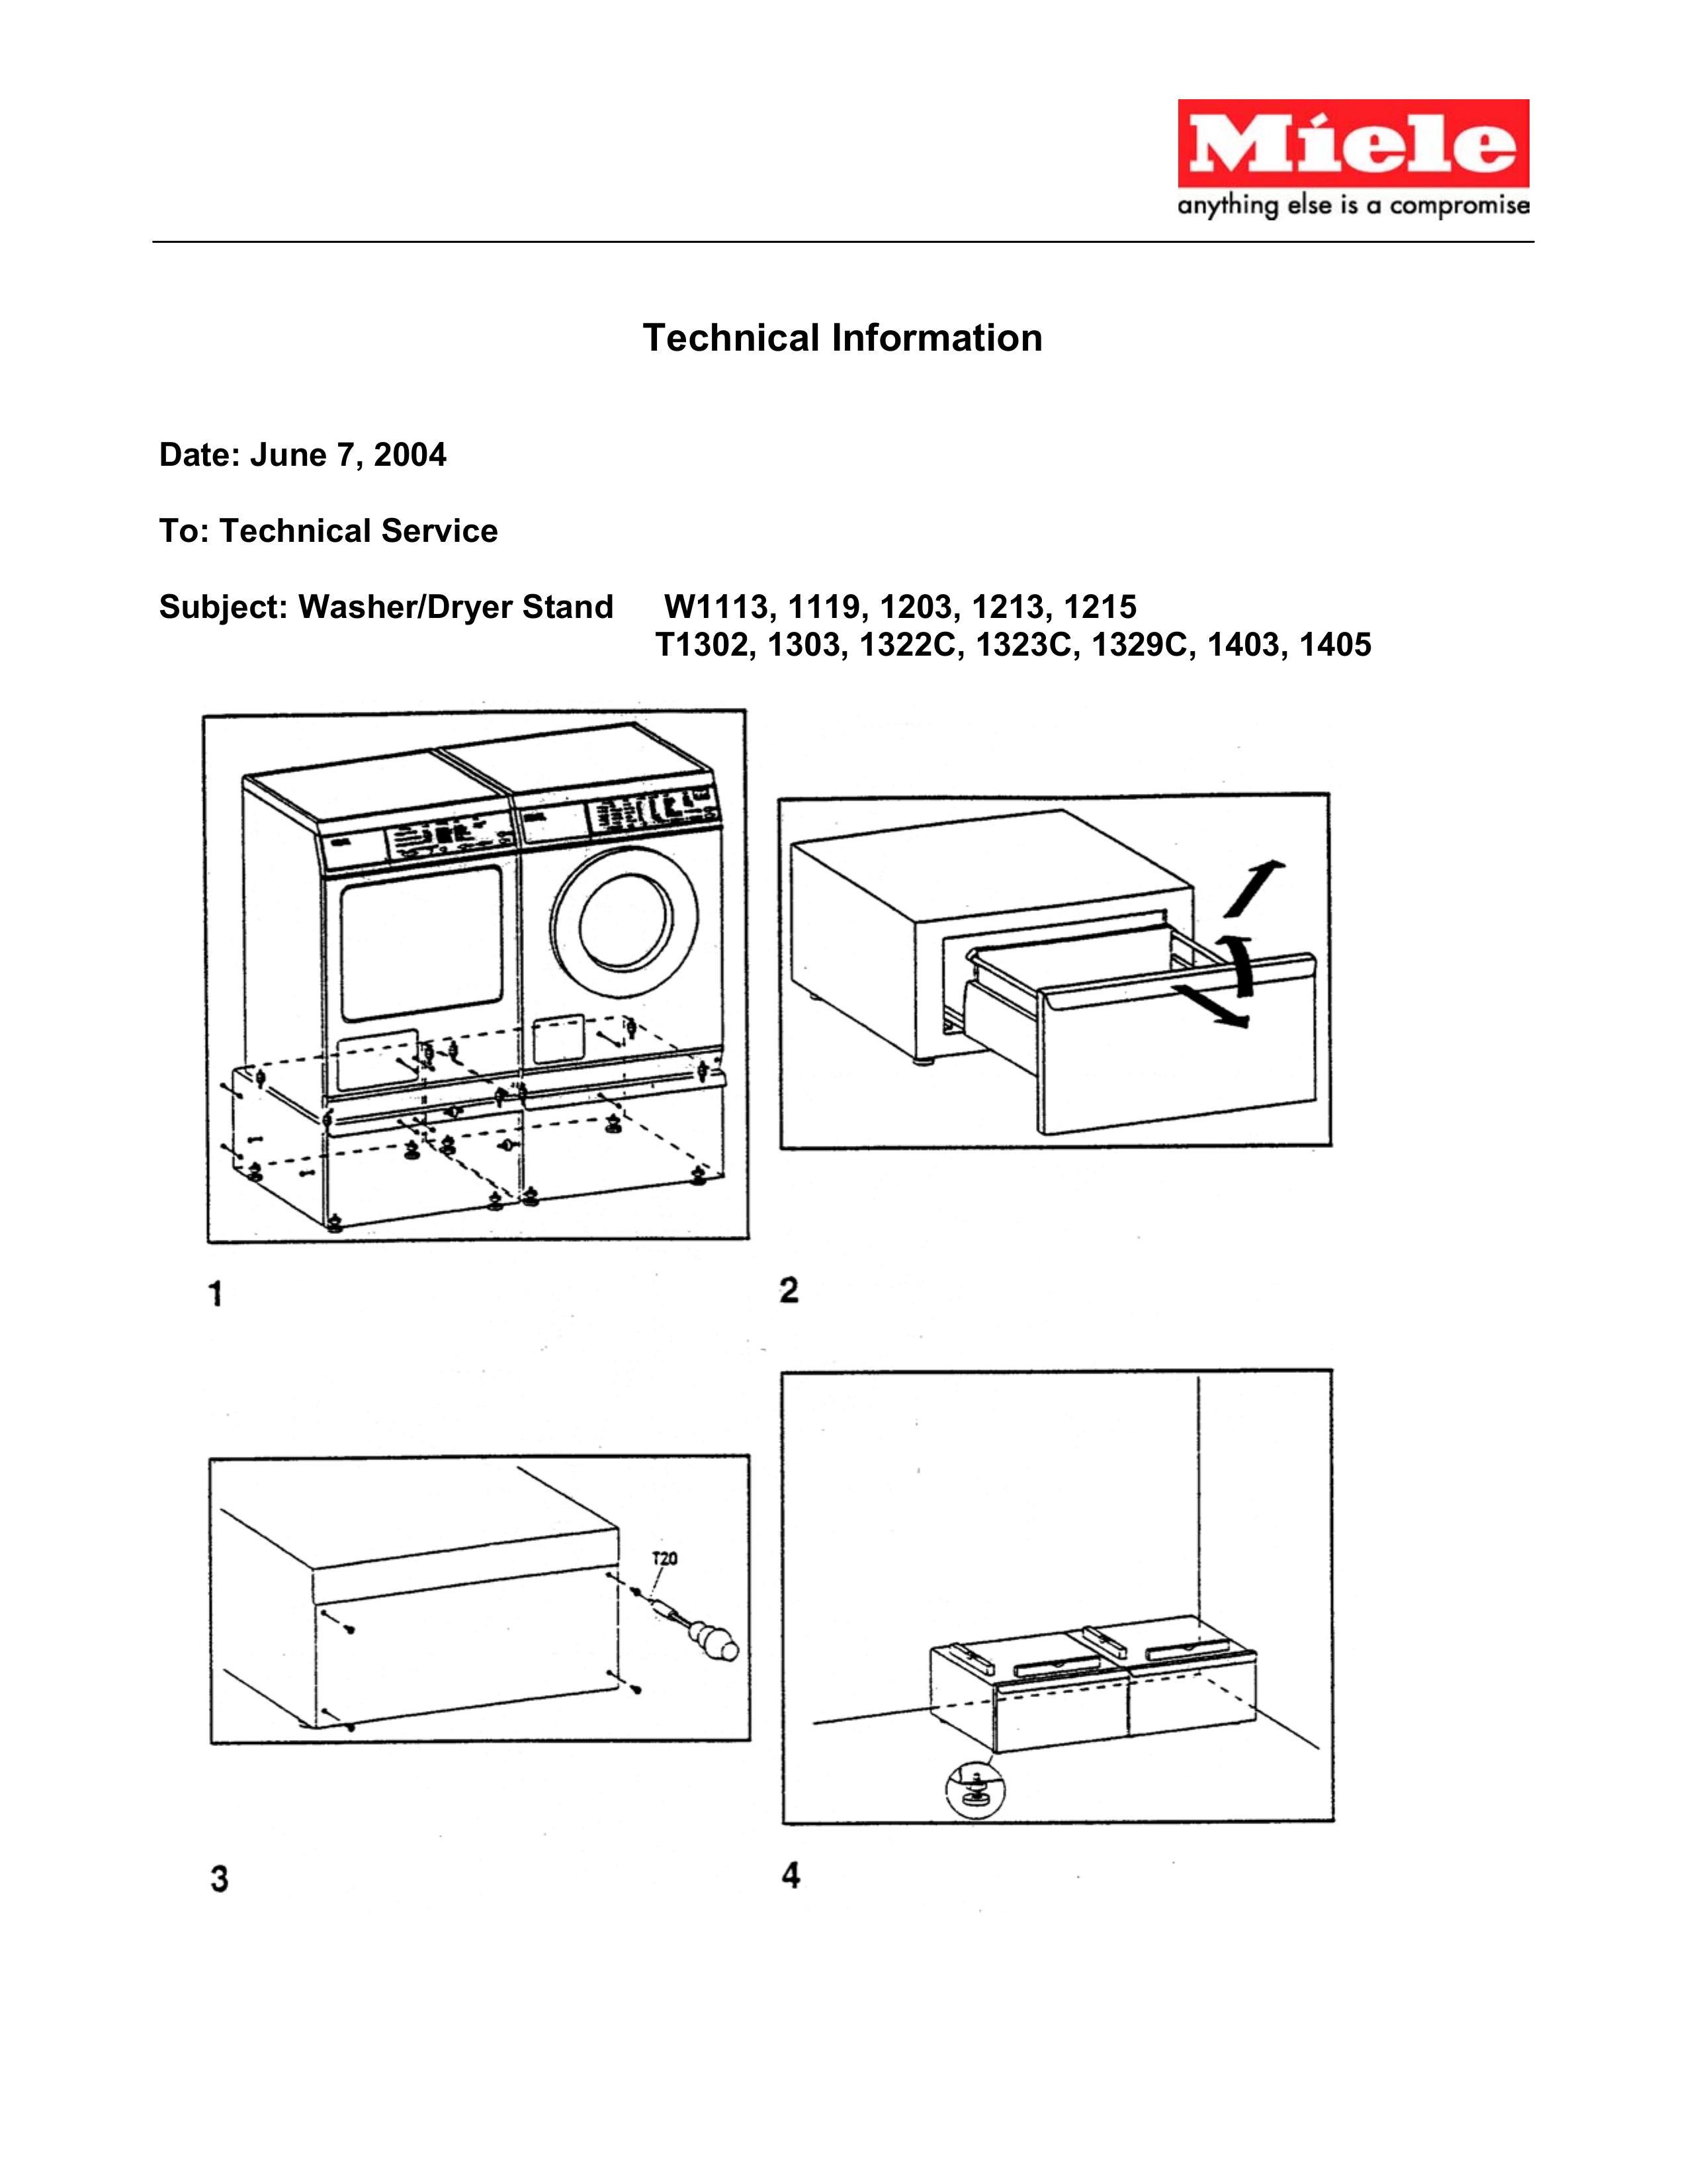 Miele W1213 Washer Accessories User Manual